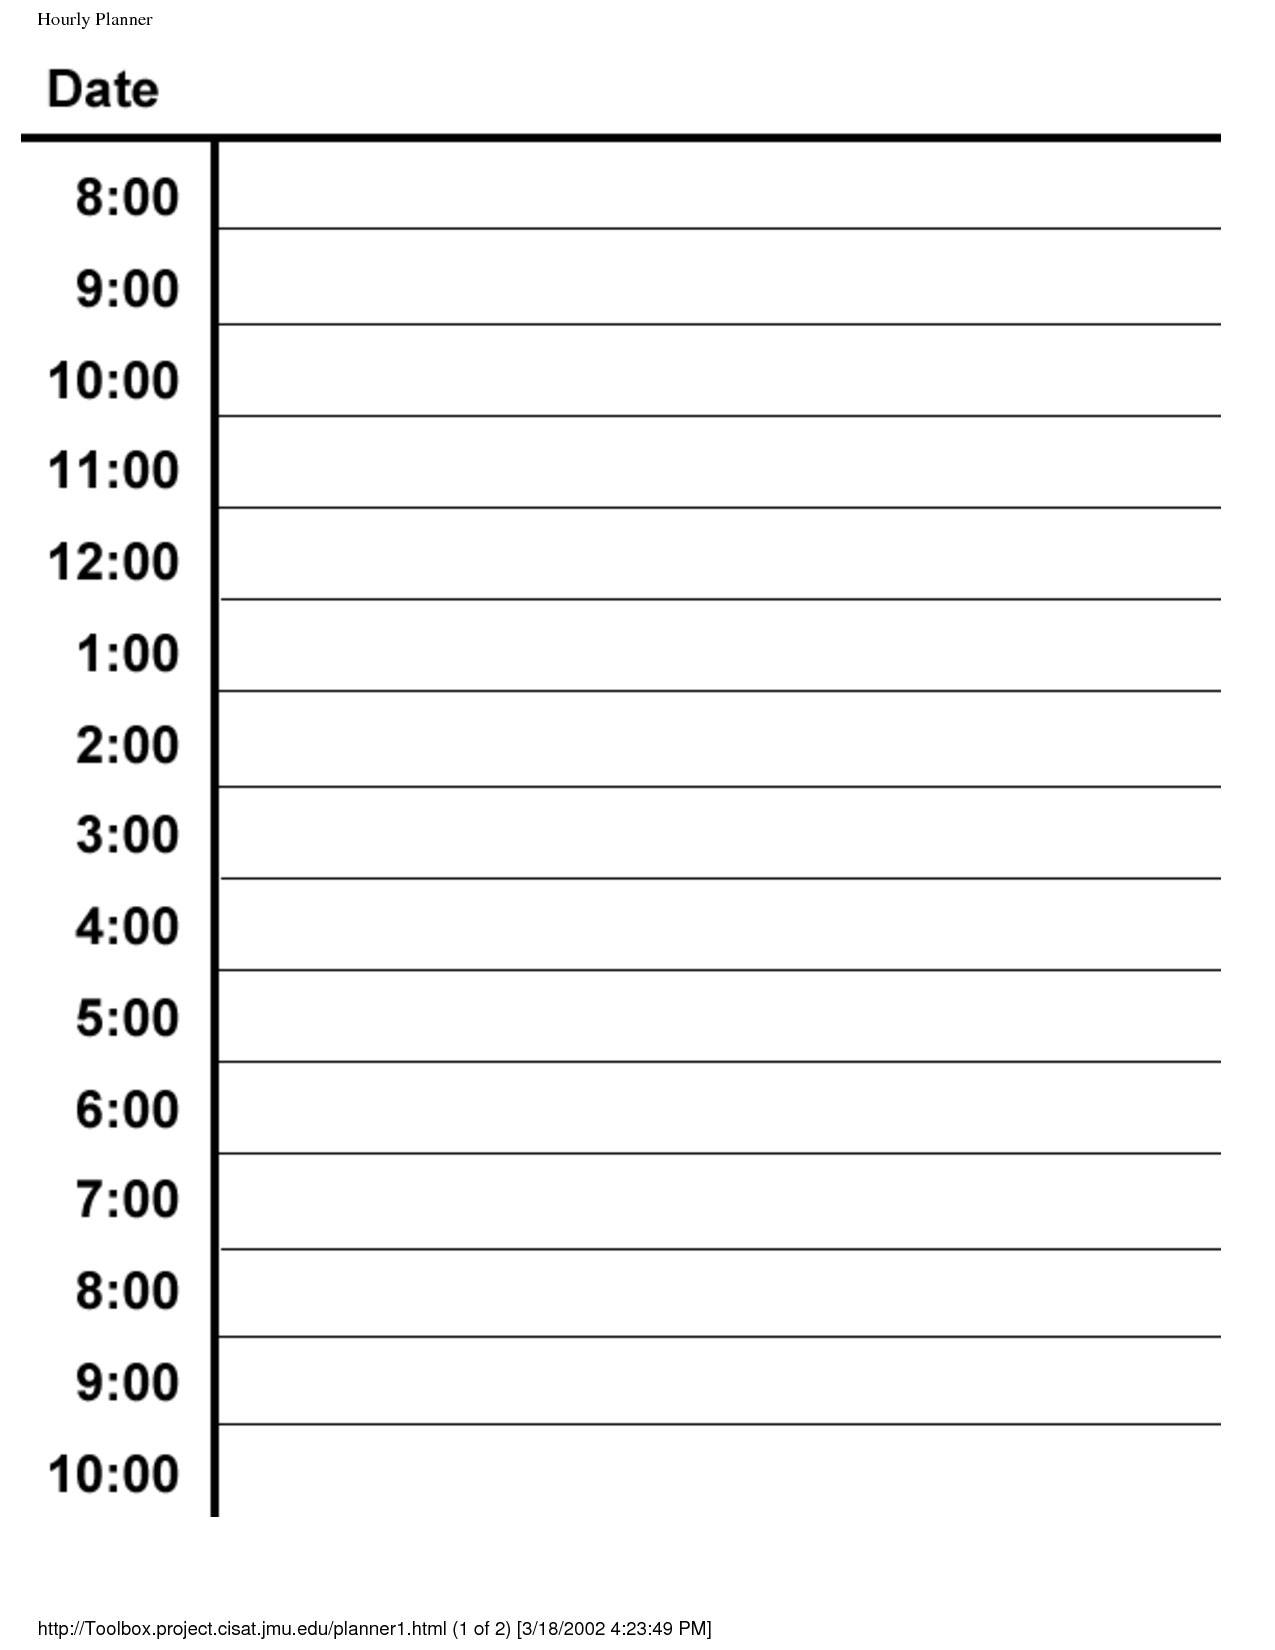 Hourly Daily Planner Template | Hourly Planner, Weekly for Hourly Day Calendar